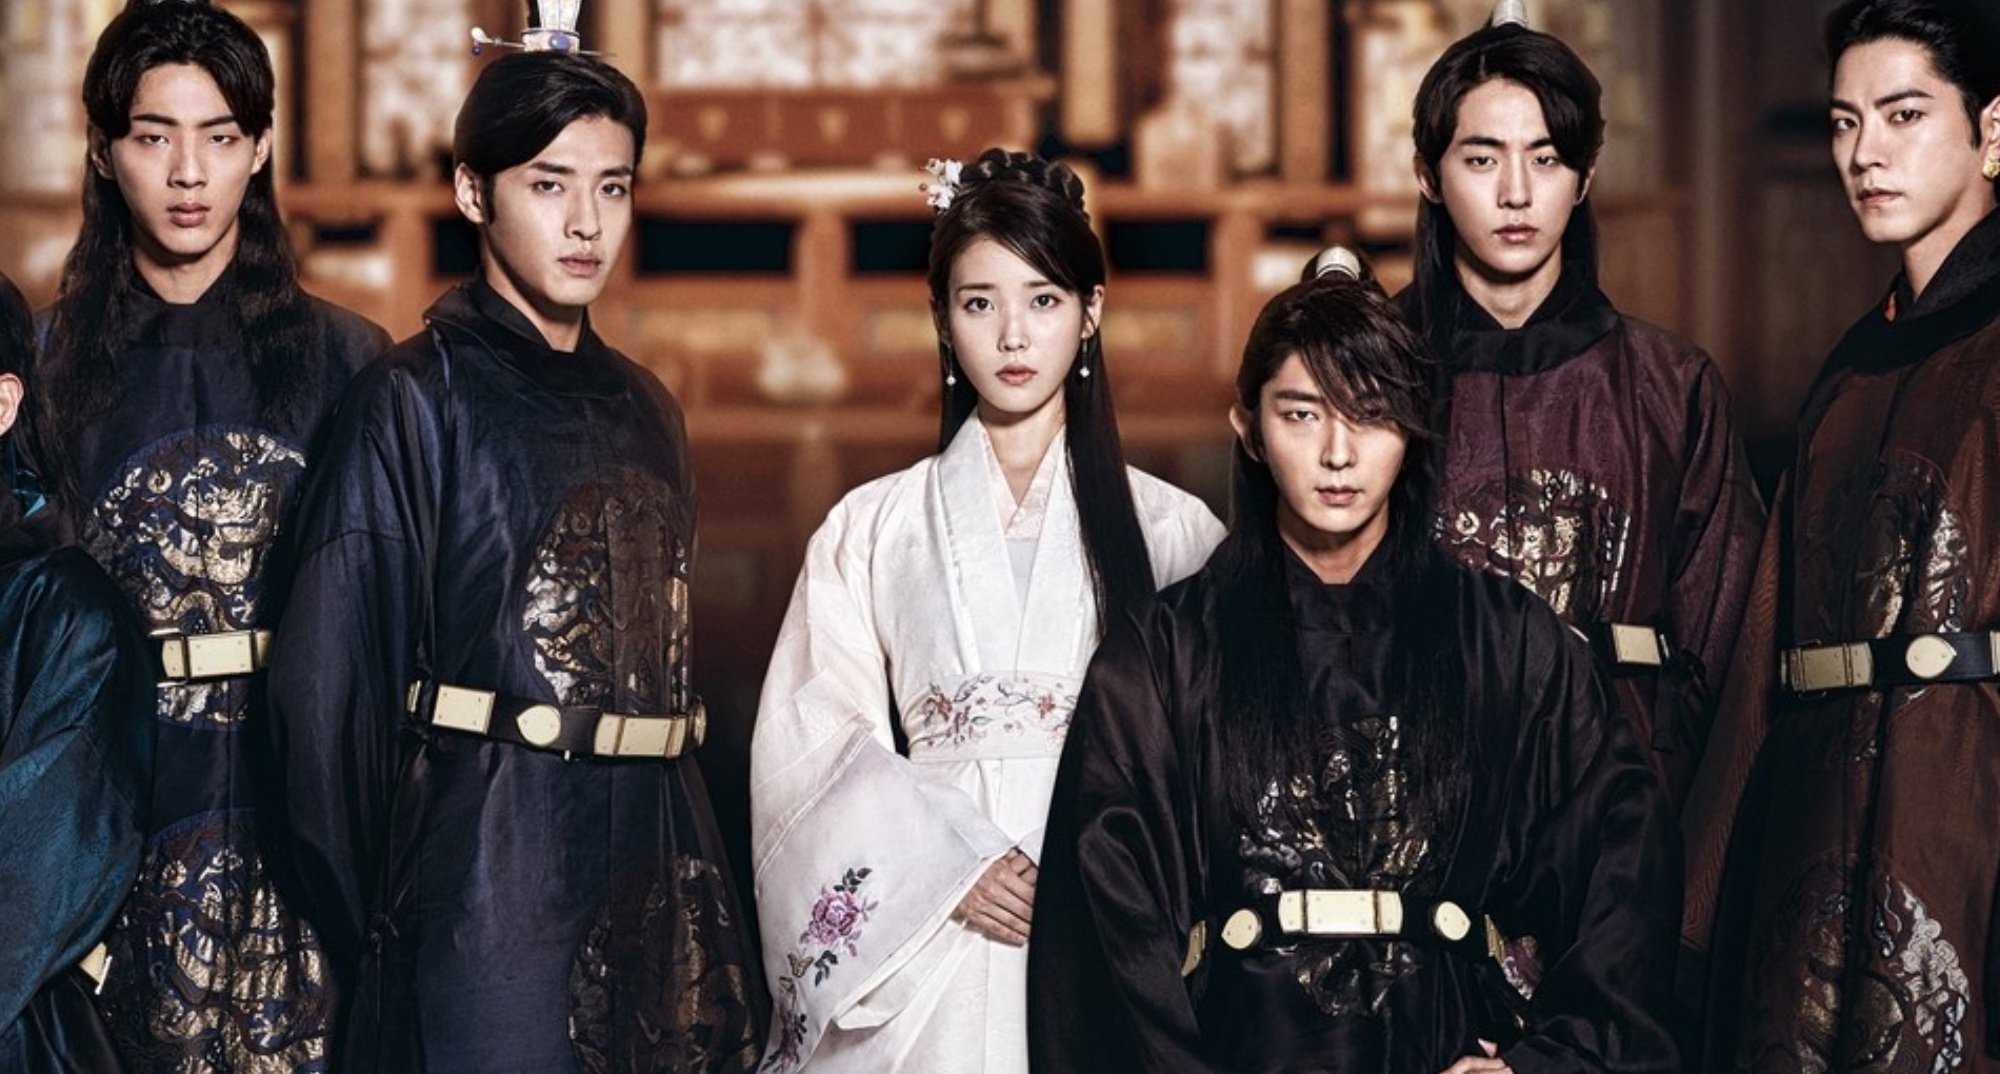 Main cast of 'Moon Lovers: Scarlet Heart Ryeo' K-drama in relation to extended ending wearing traditional attire.